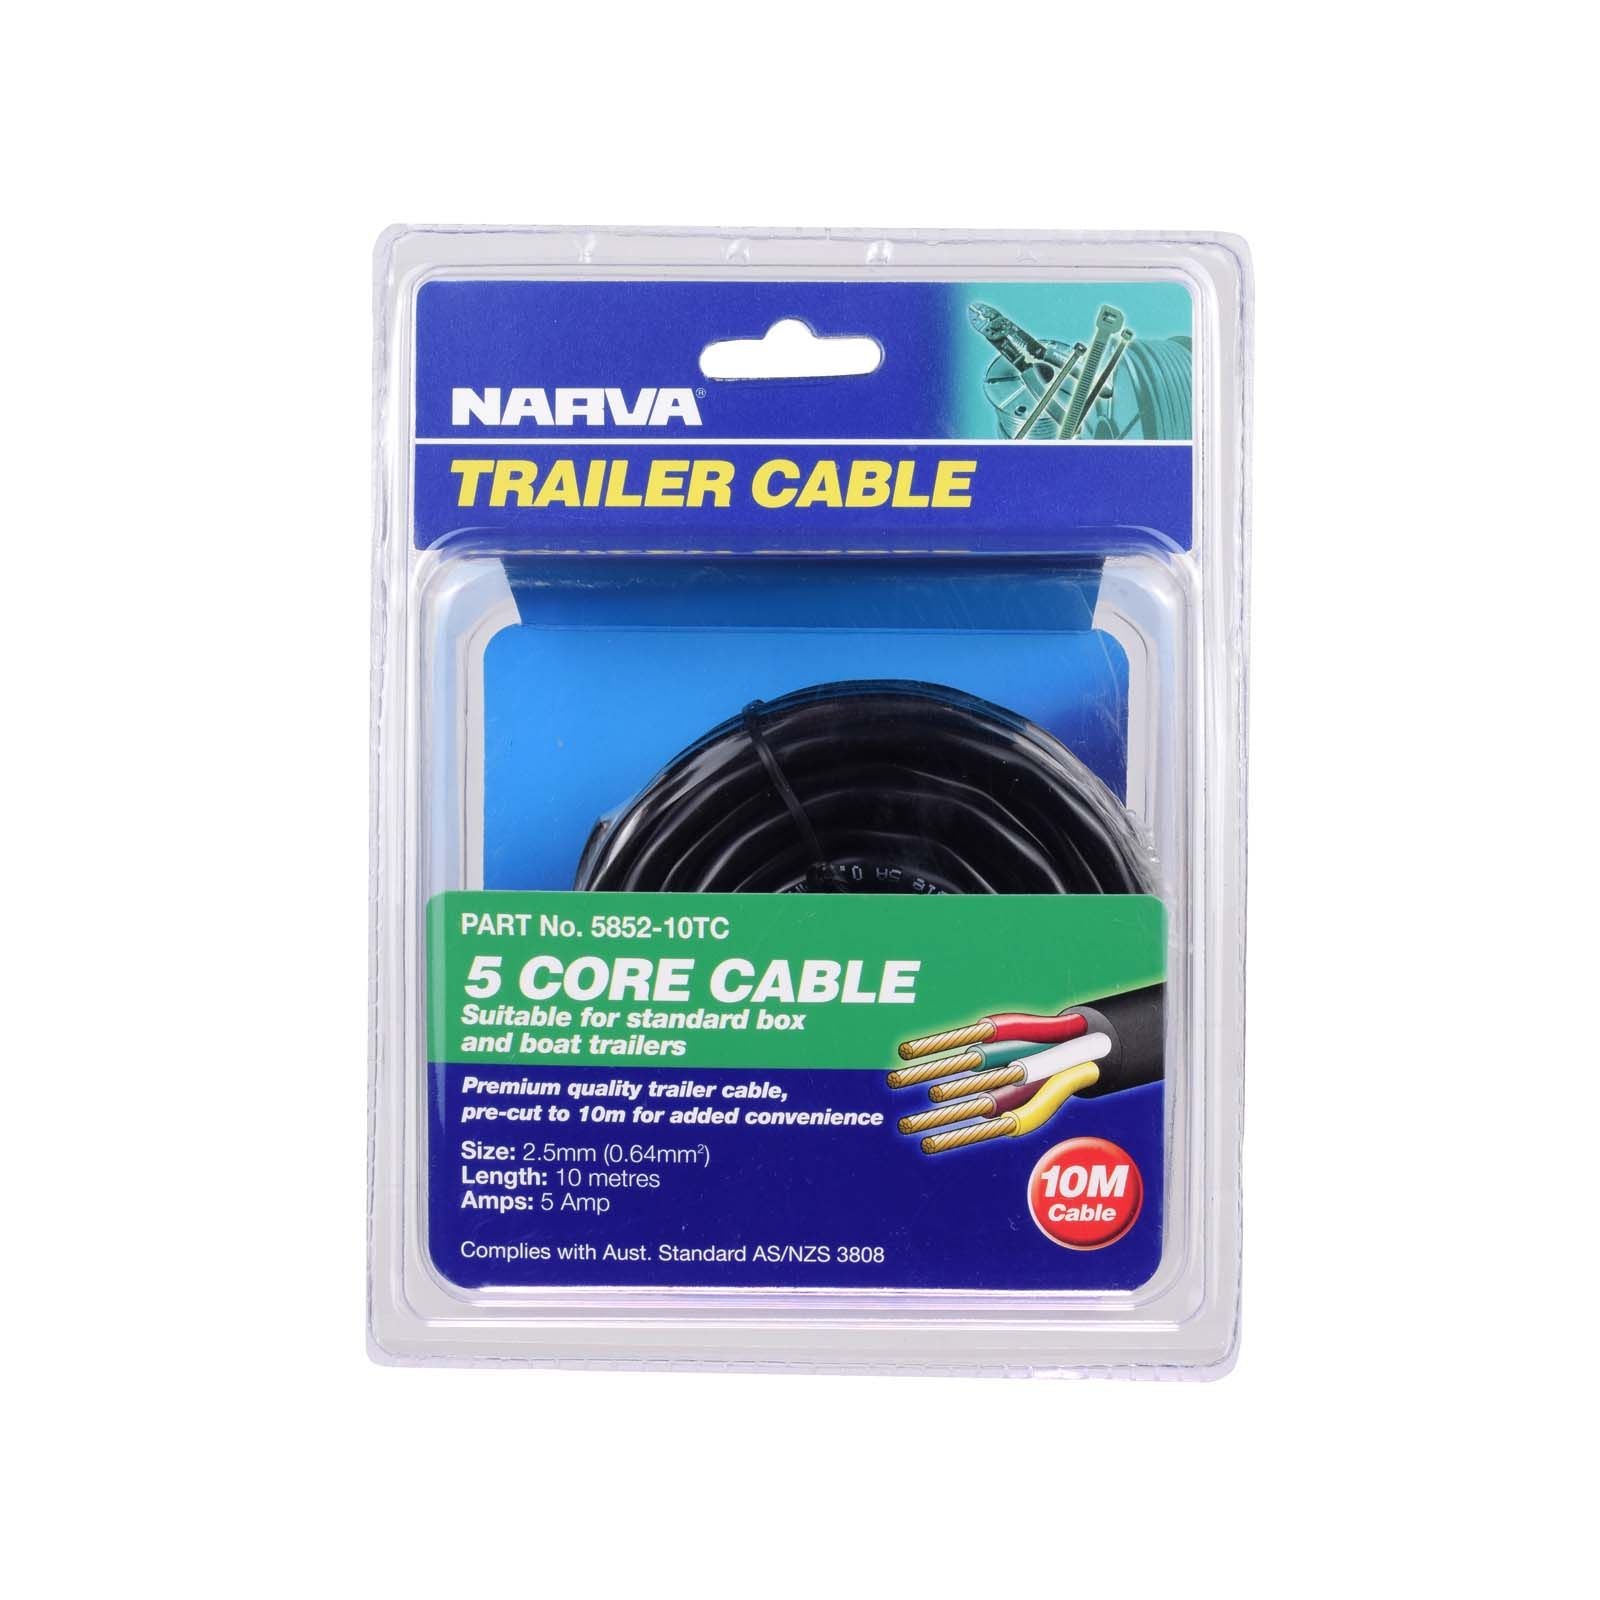 (5 AMP) 2.5MM 5 CORE TRAILER CABLE Red, Green, Yellow, White, Brown - Trek Hardware